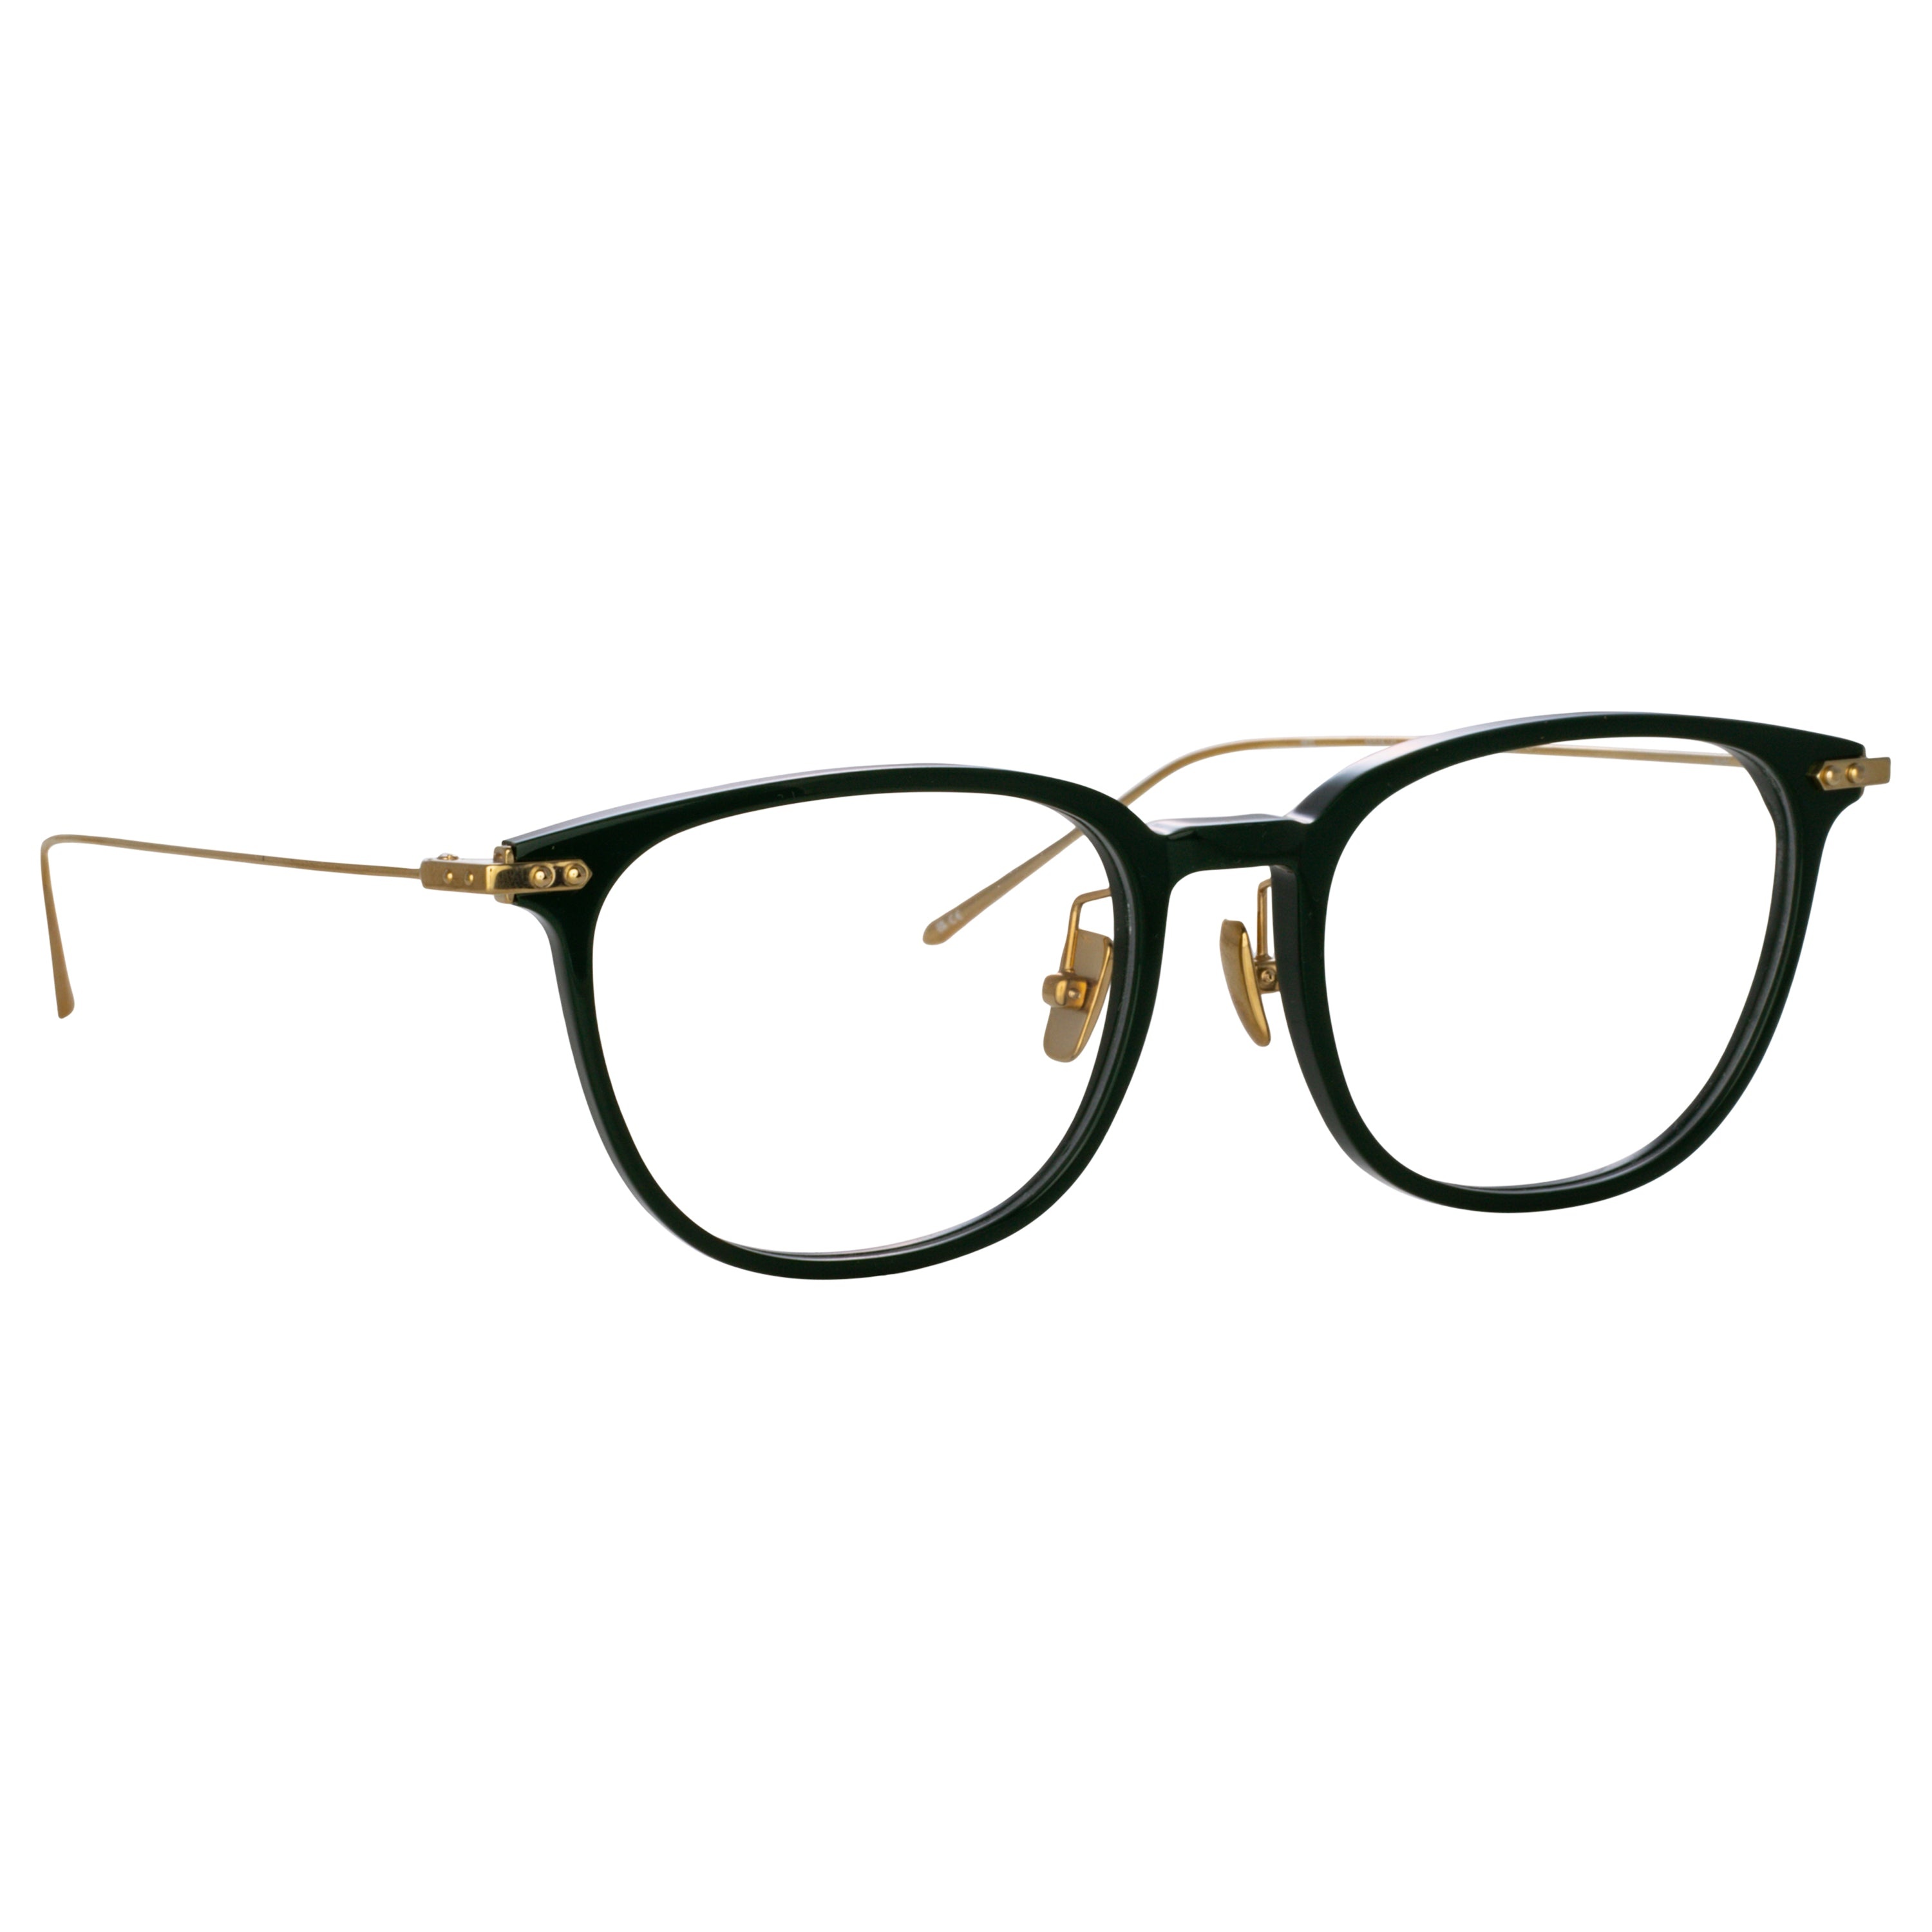 WRIGHT RECTANGULAR OPTICAL FRAME IN FOREST GREEN (ASIAN FIT) - 3